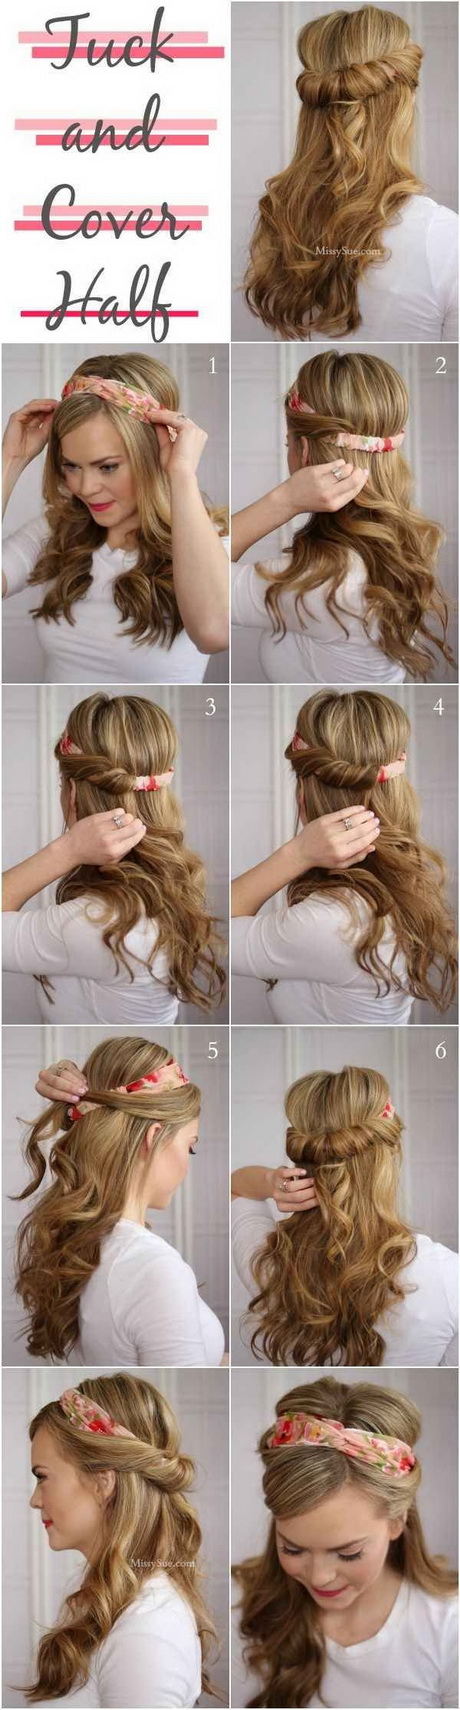 hairstyles-tutorials-for-long-hair-58_7 Hairstyles tutorials for long hair